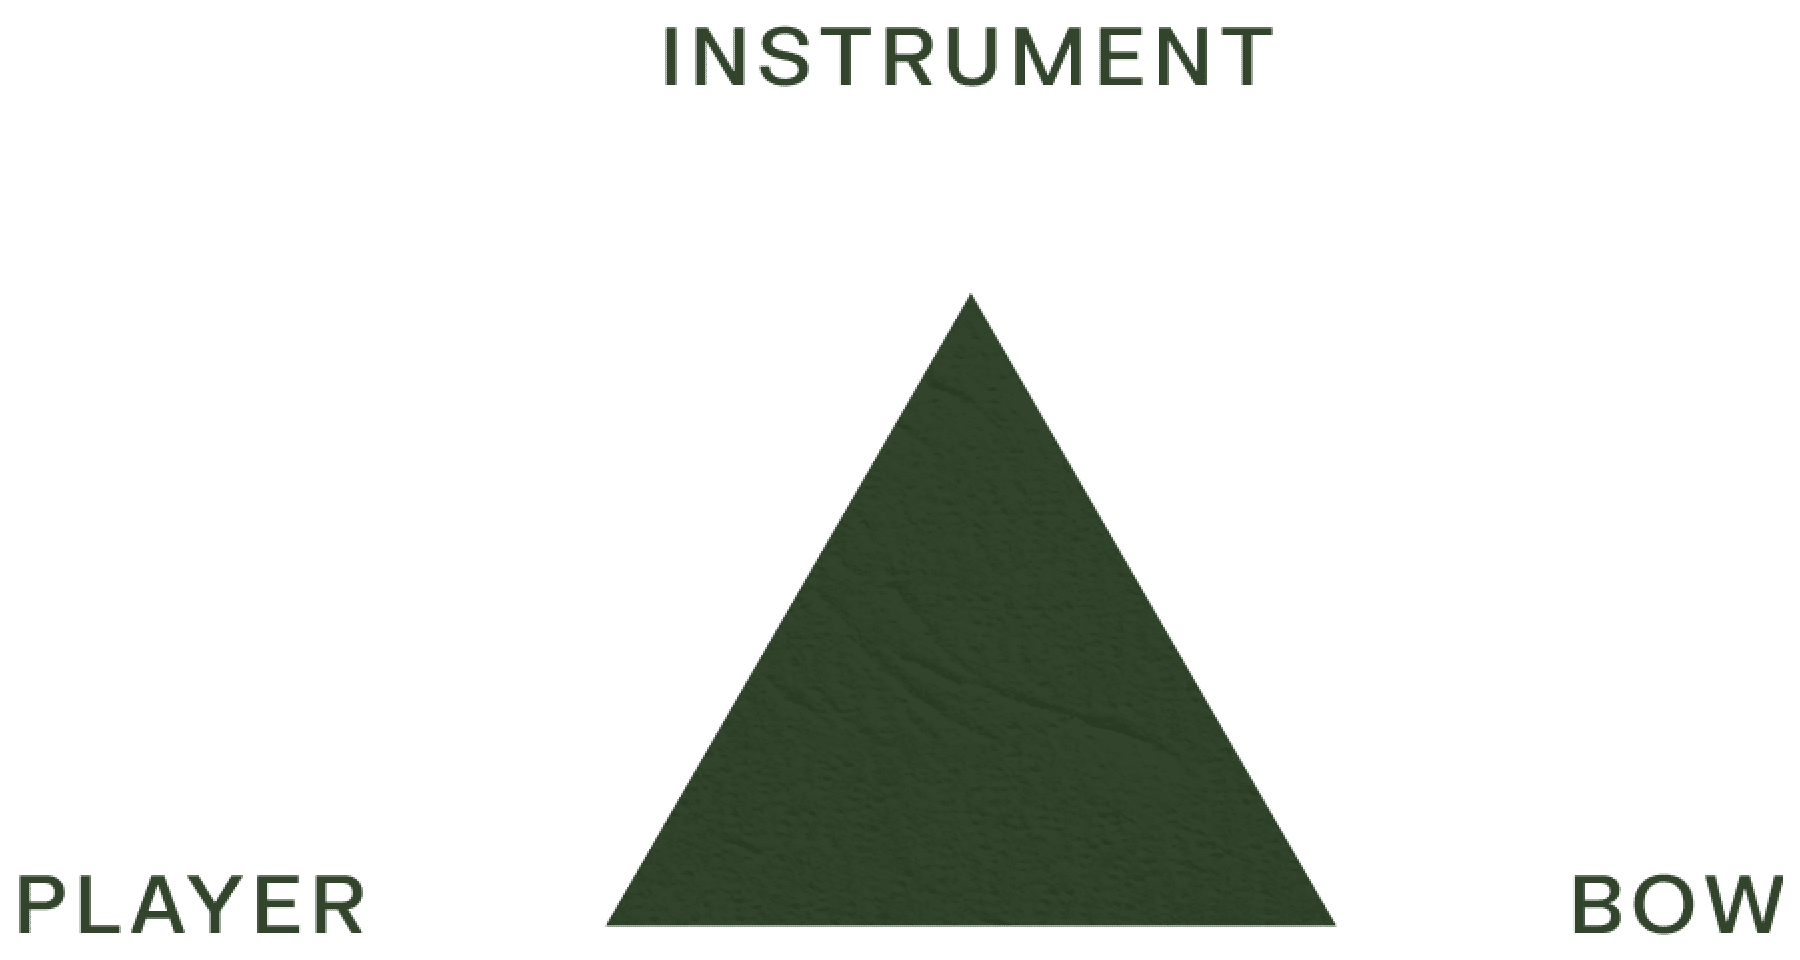 Instrument, Player, Bow triangle